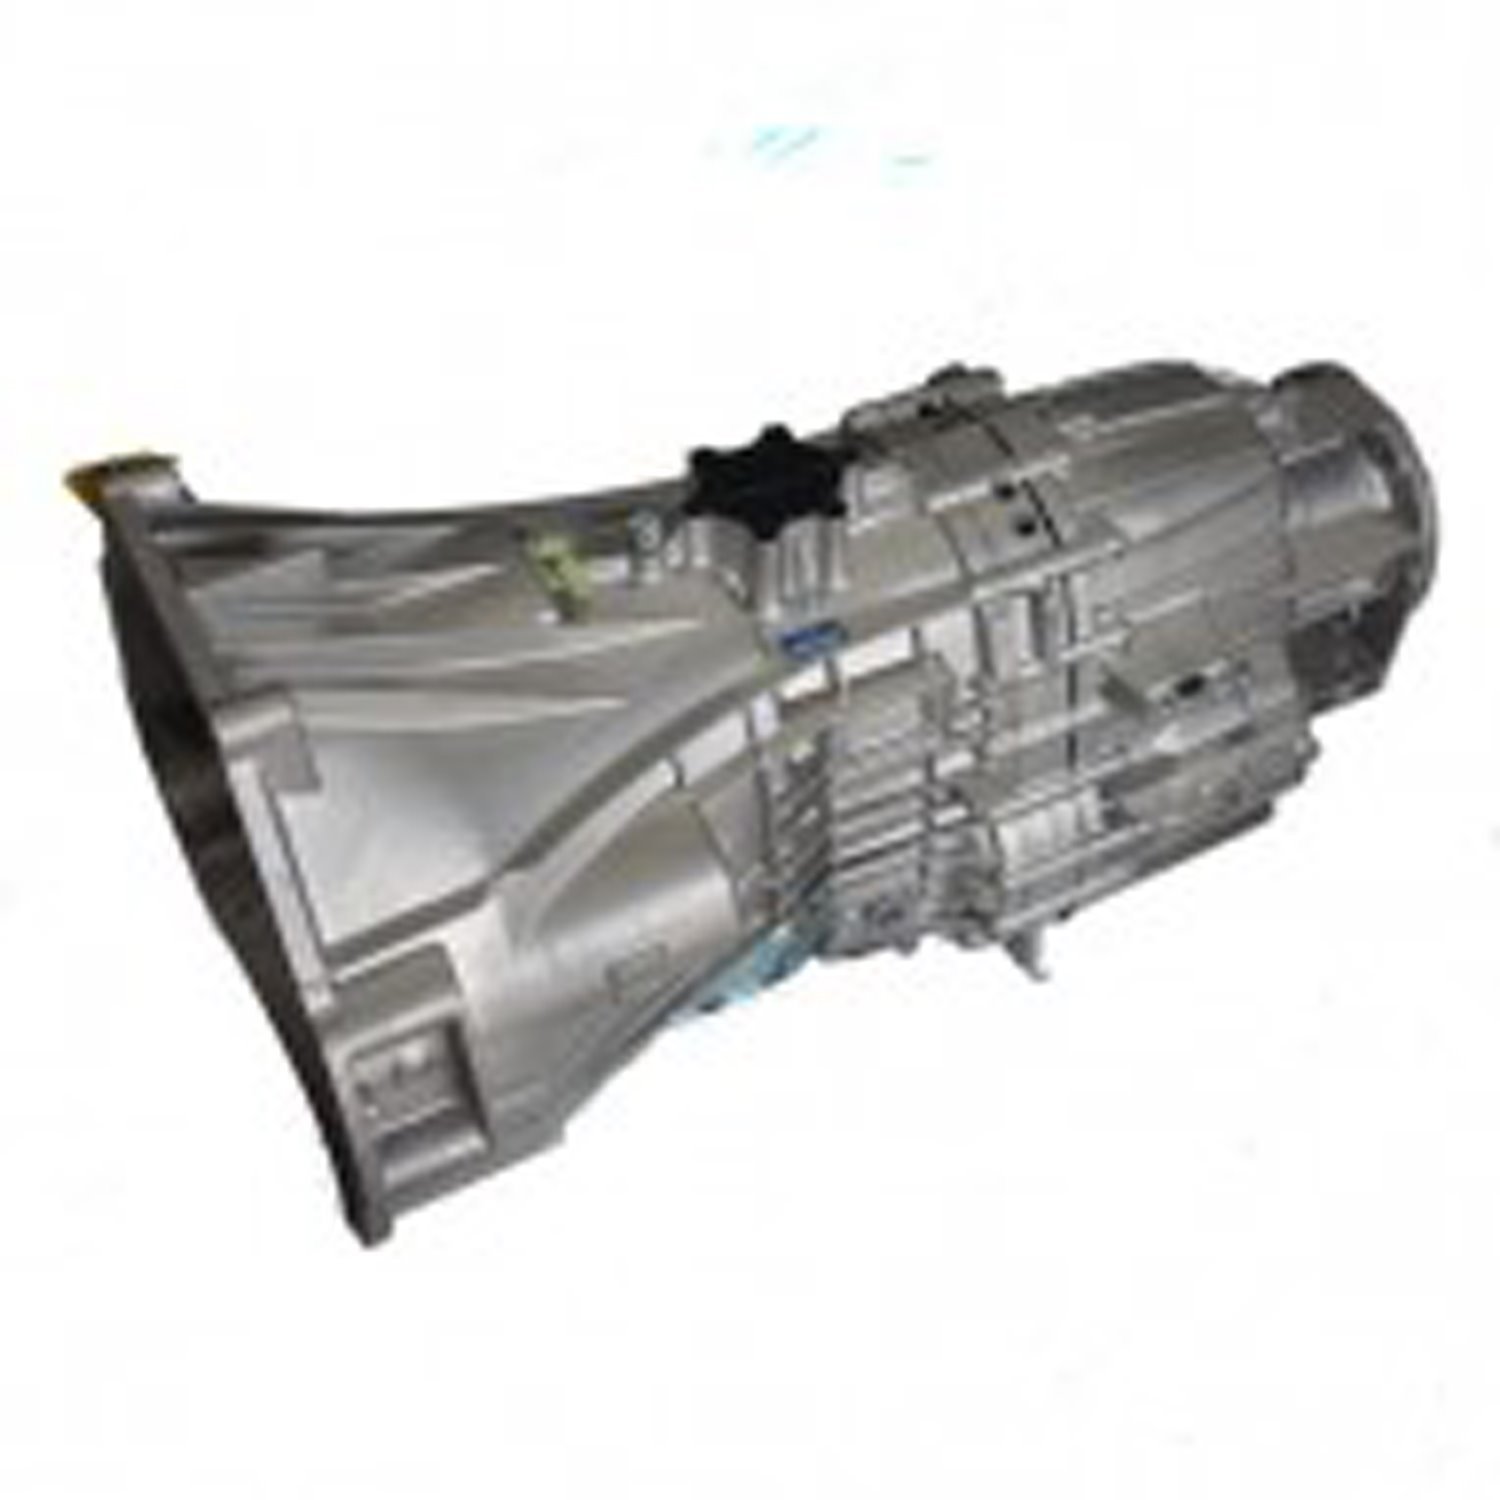 Remanufactured S6-S650F Manual Transmission for Ford 2003